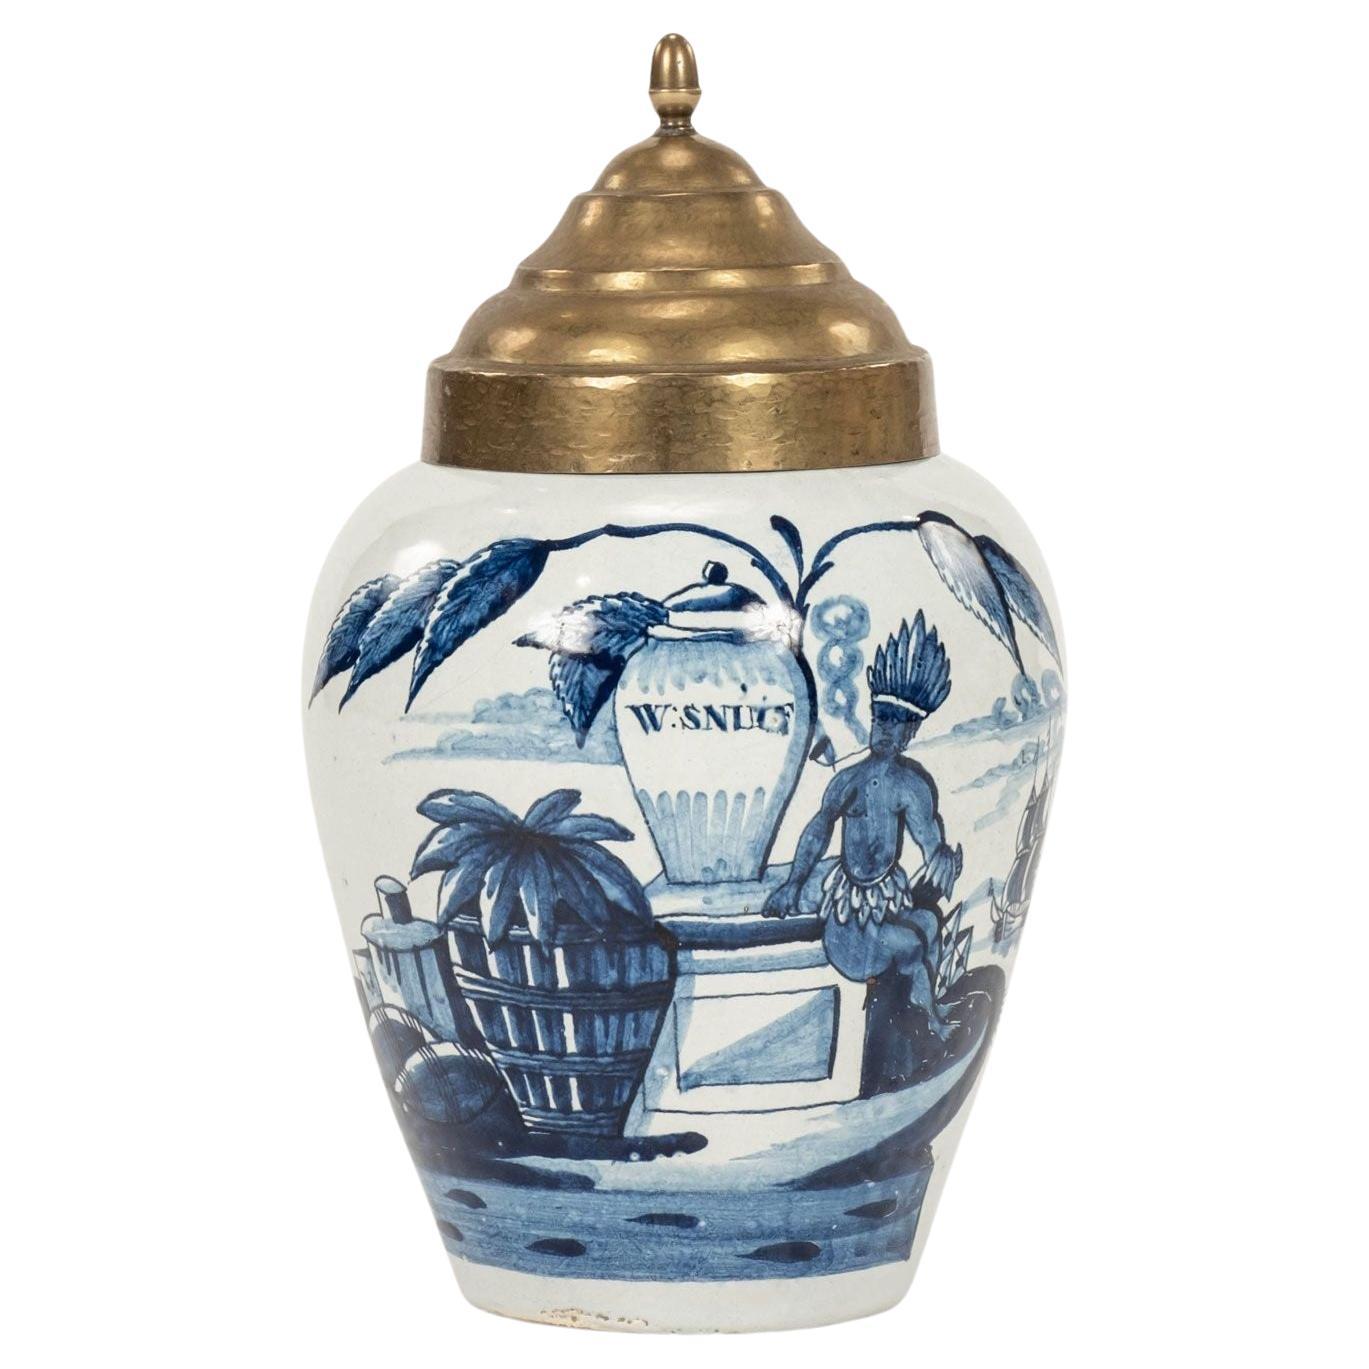 Delft Blue and White “W:Snuif” Tobacco Jar For Sale